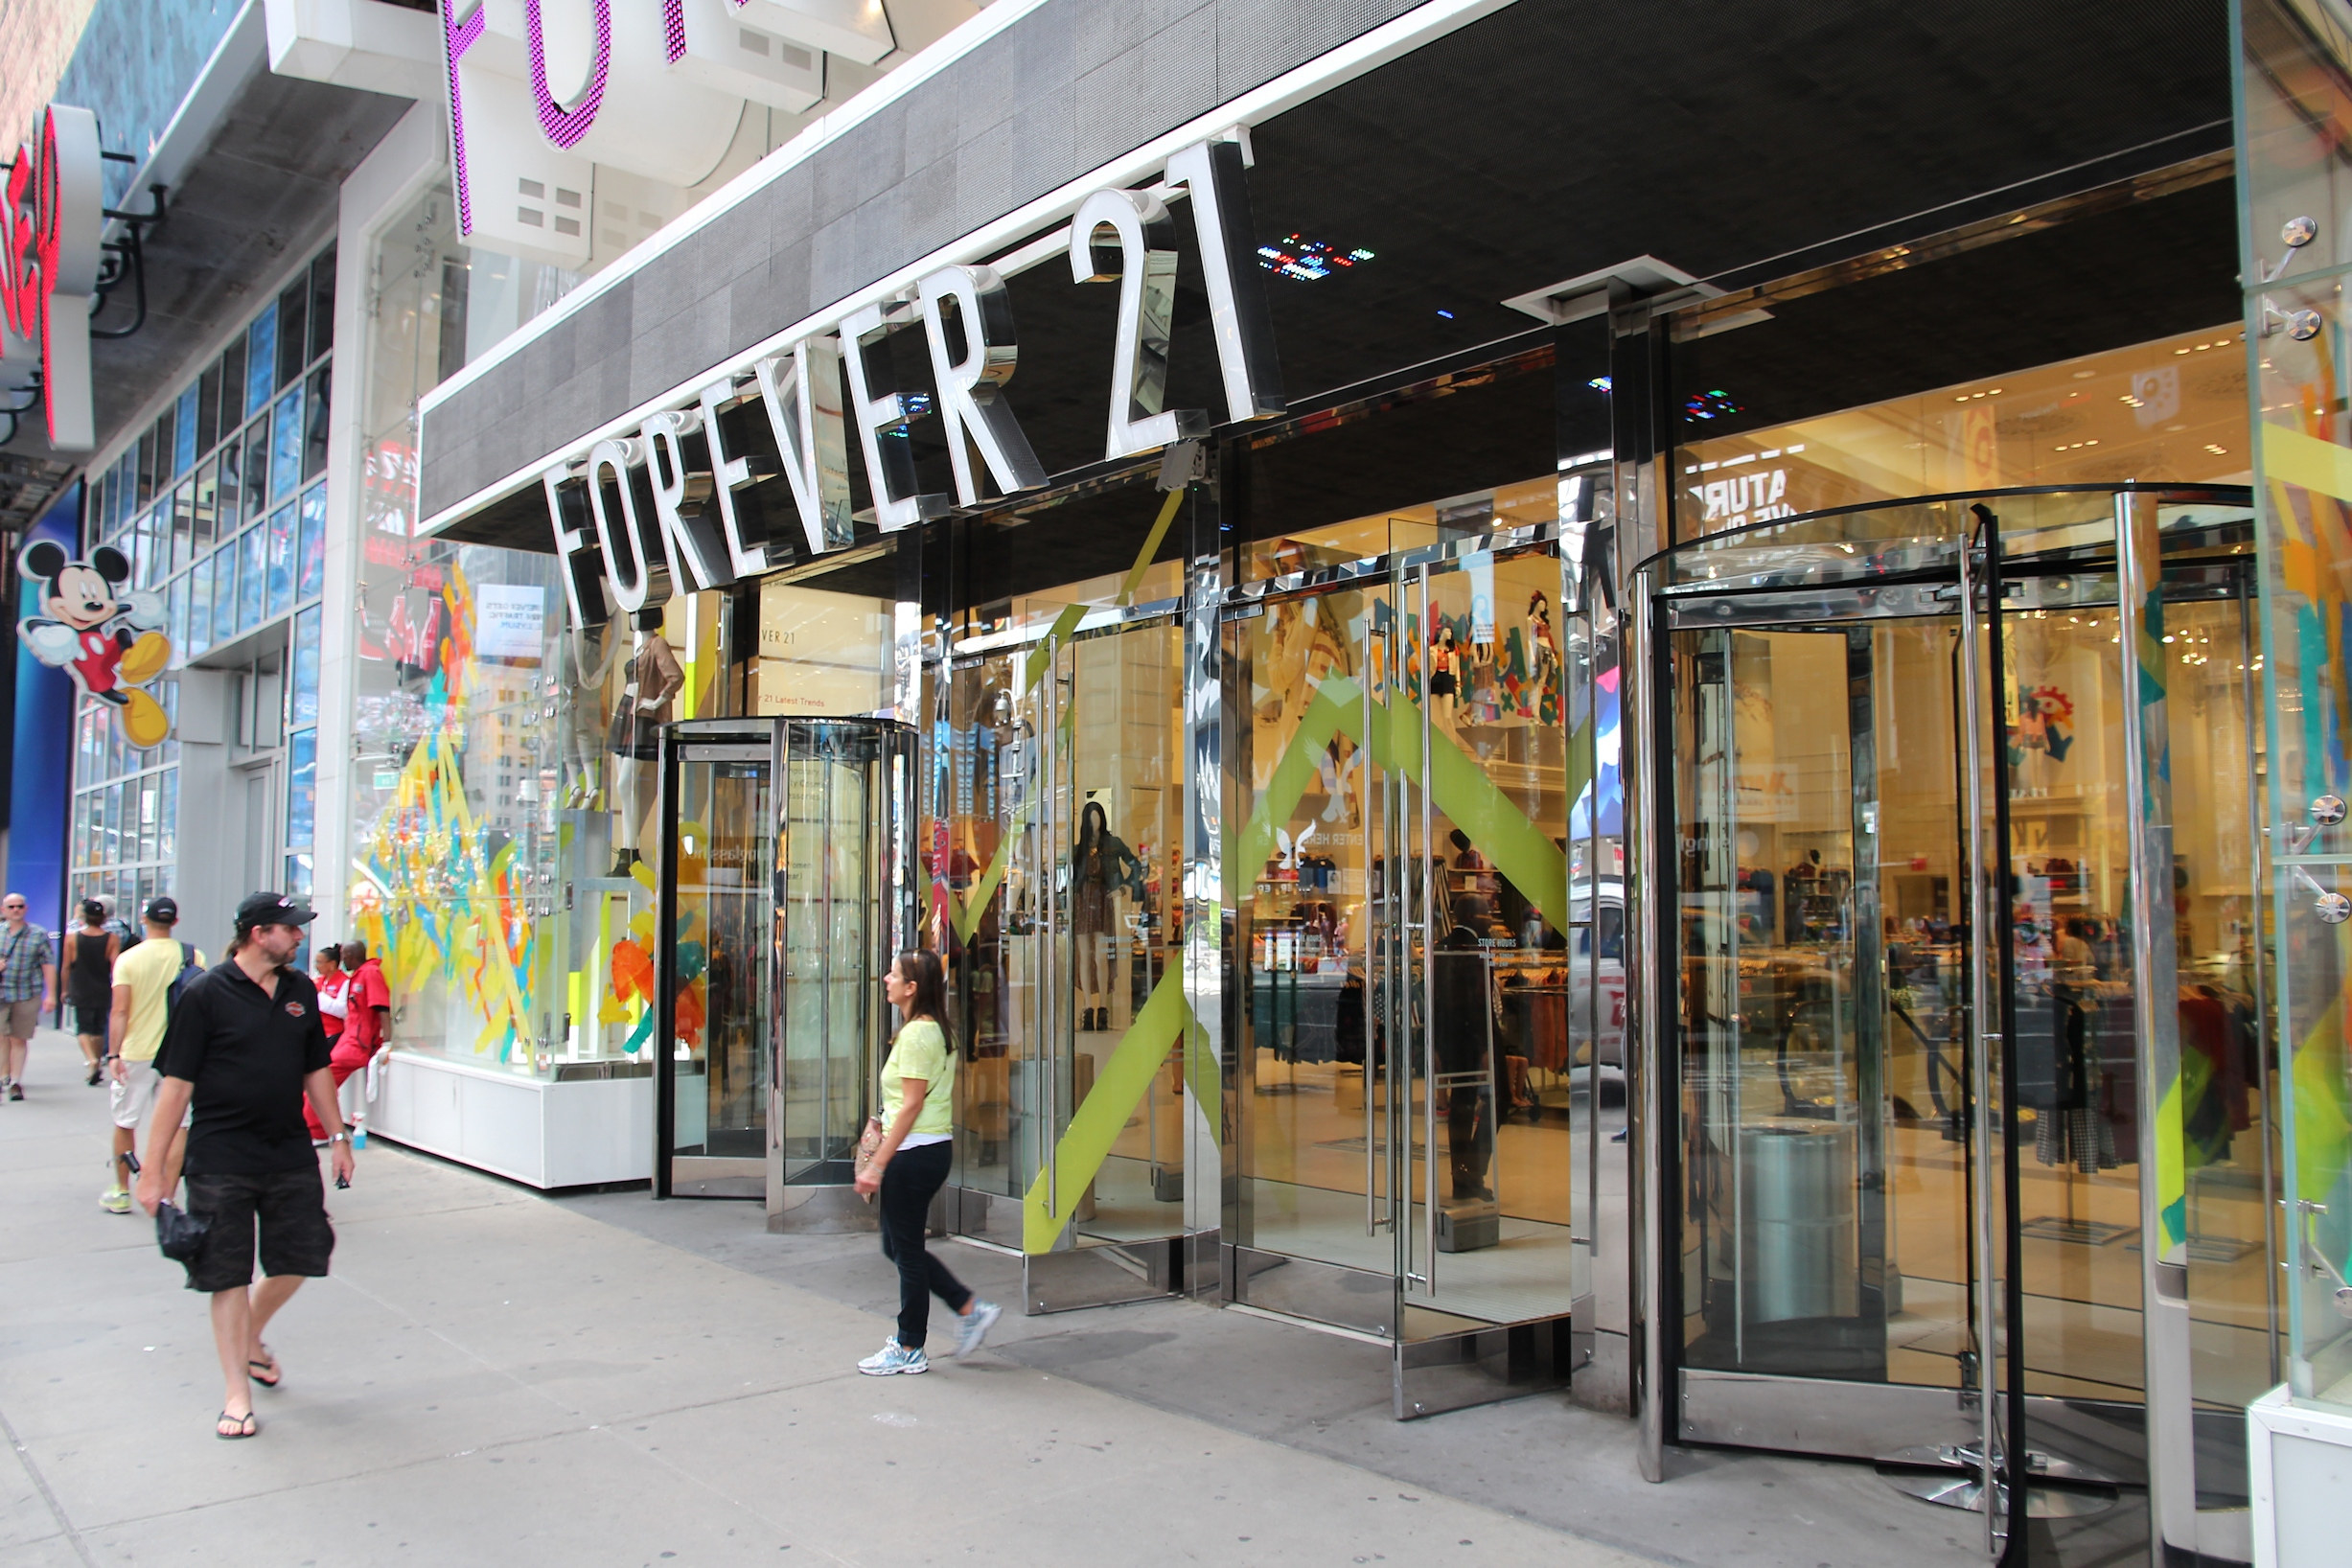 A Forever 21 storefront in Times Square